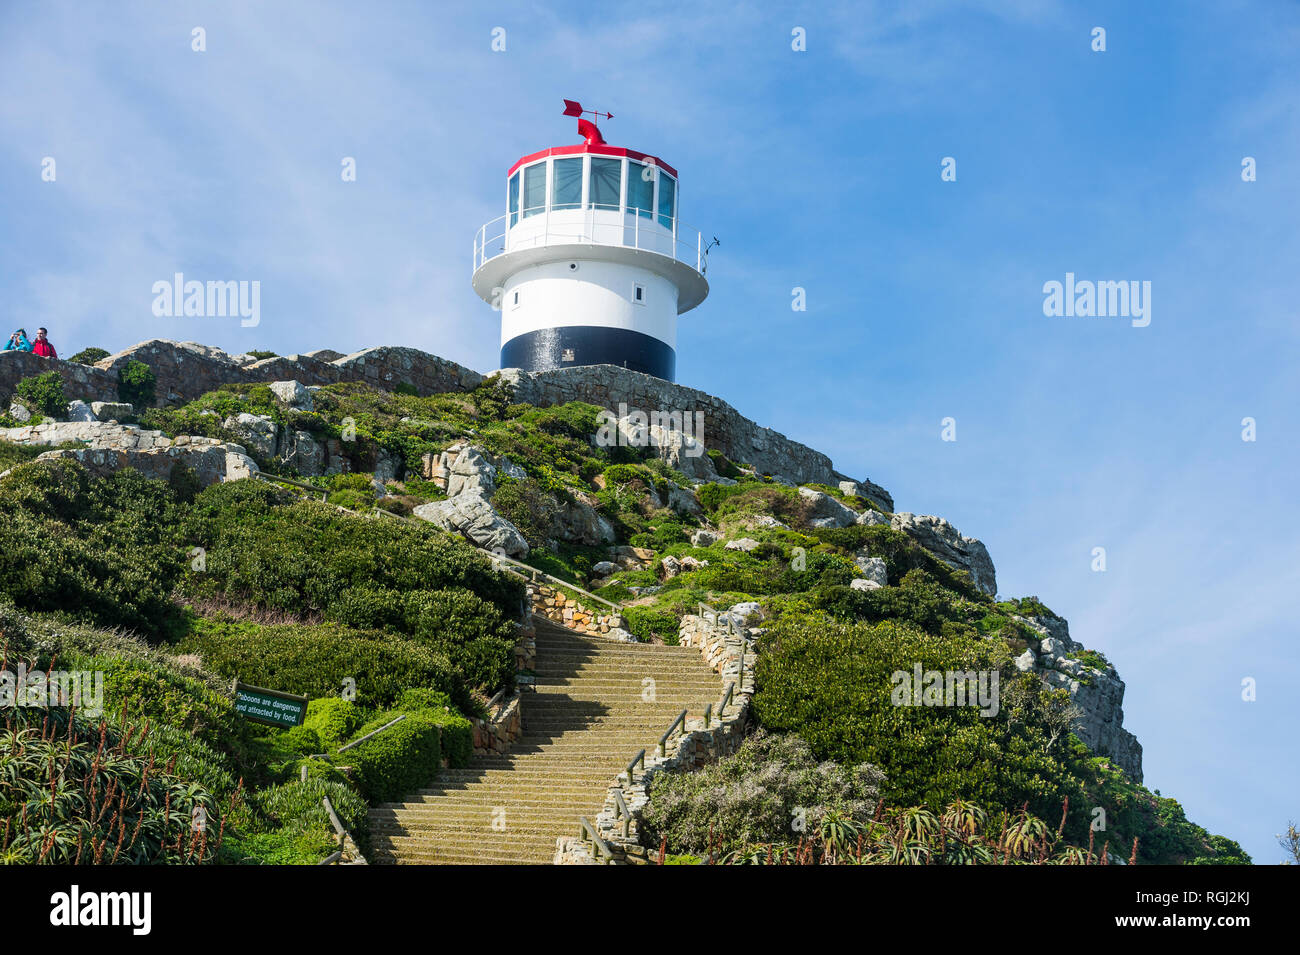 South Africa, Cape of Good Hope, Cape Point Lighthouse Stock Photo